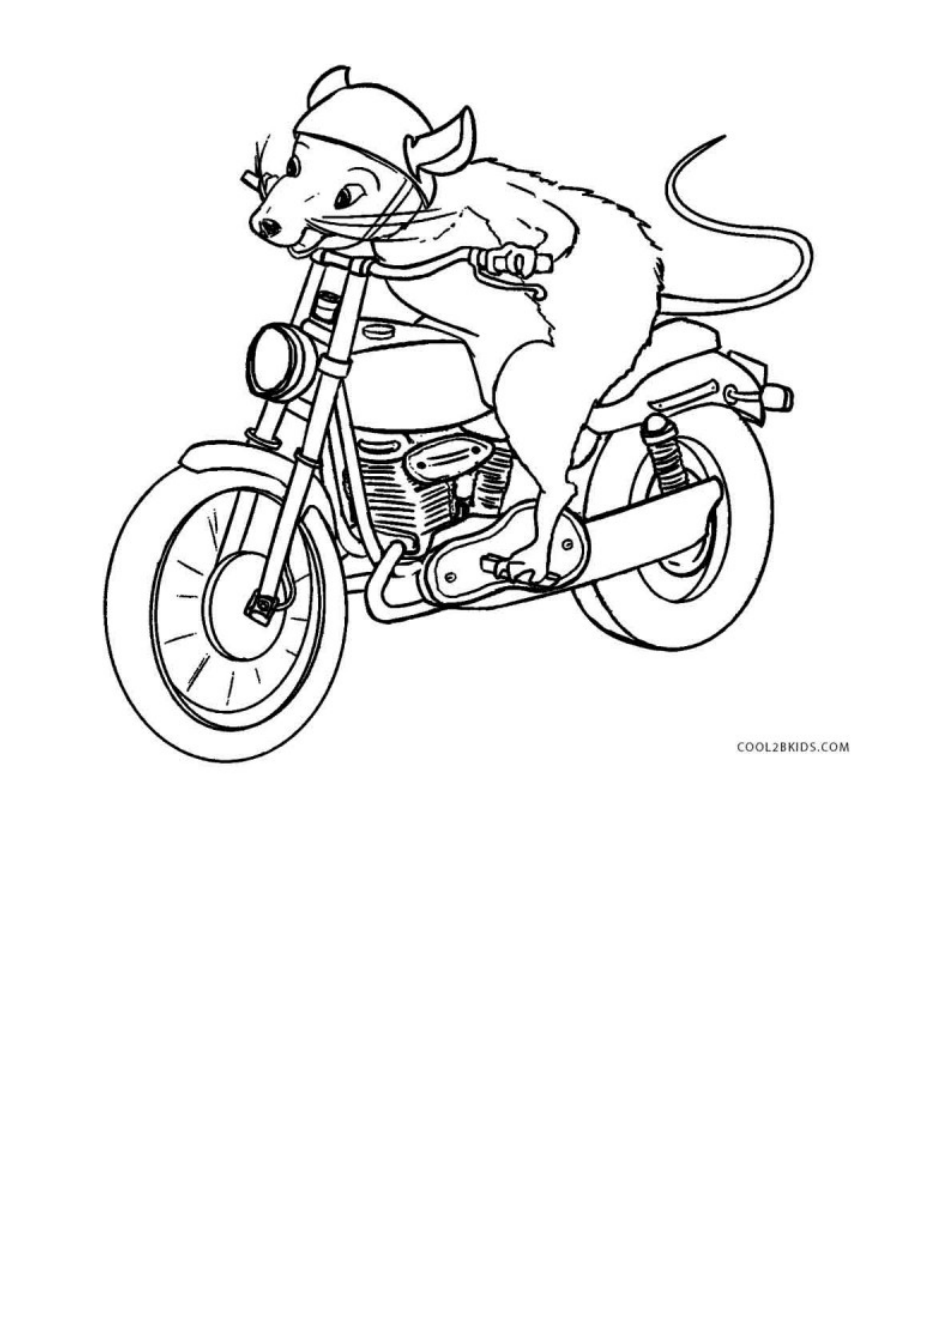 Rat on a Motorcycle Coloring Page